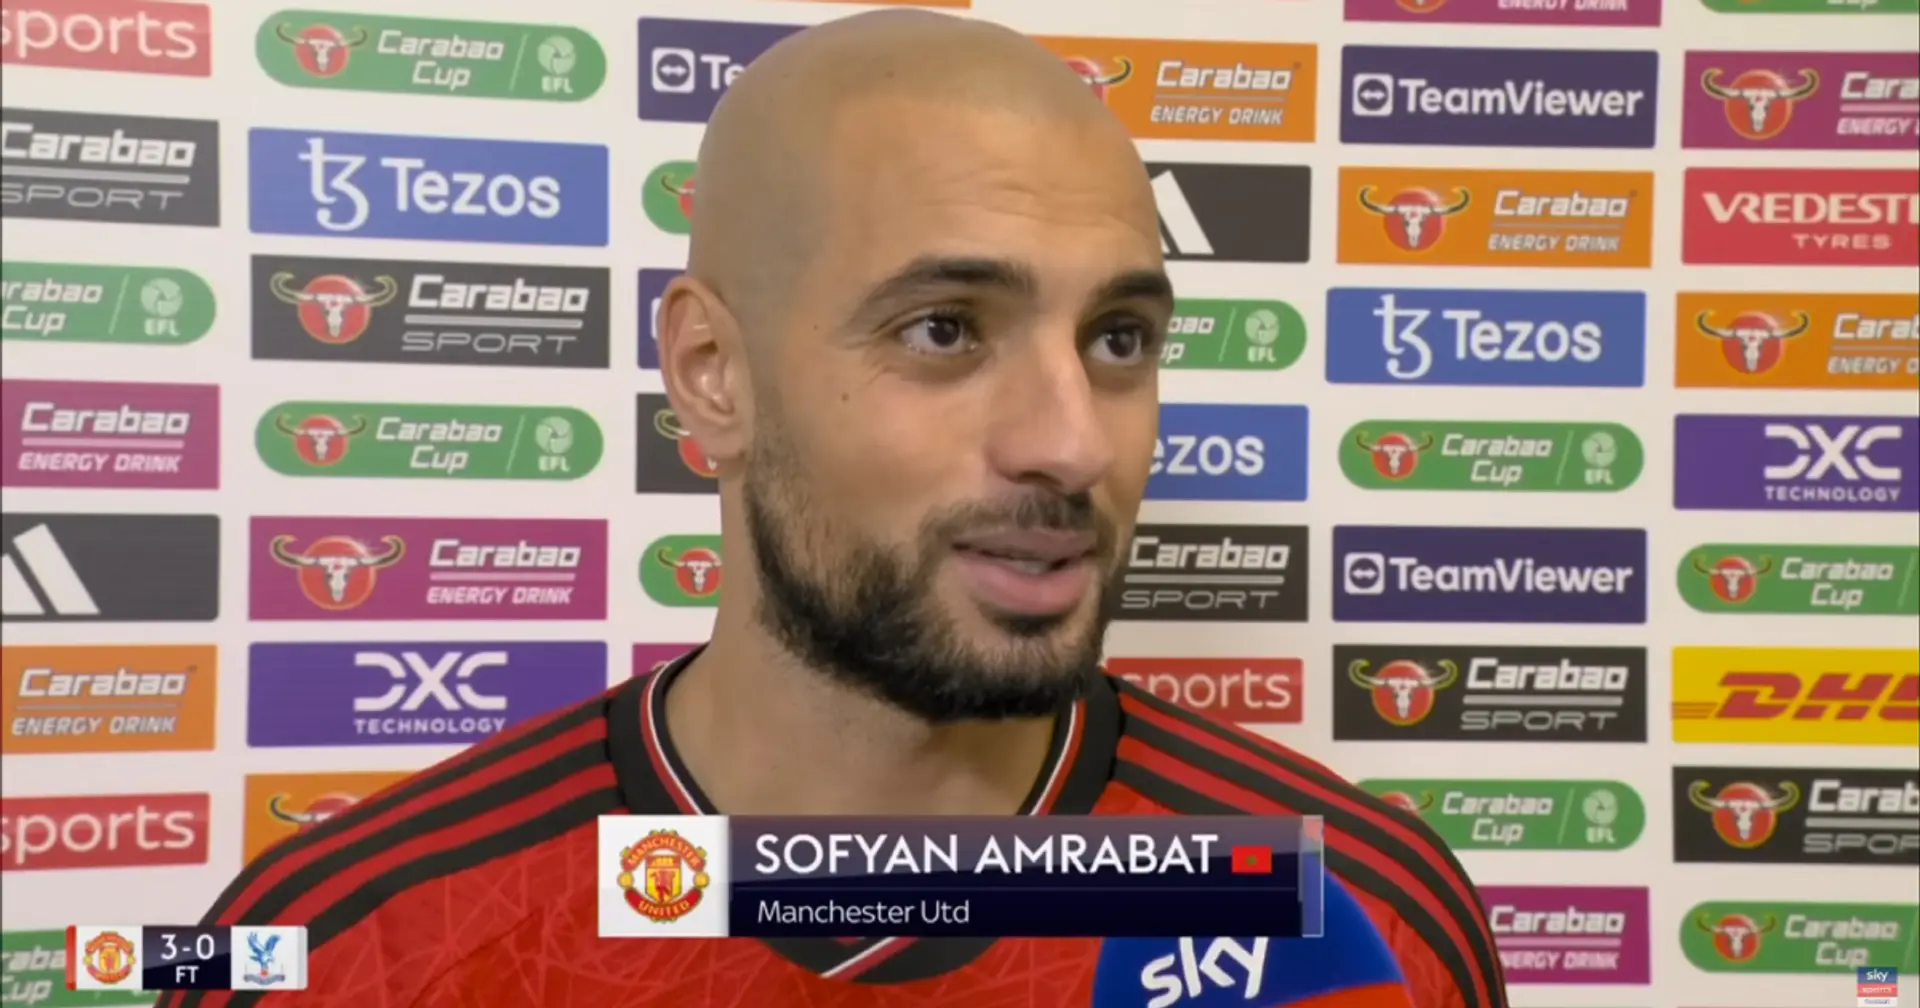 'I will even play as a goalkeeper': Sofyan Amrabat not worried about being used out of position by Ten Hag